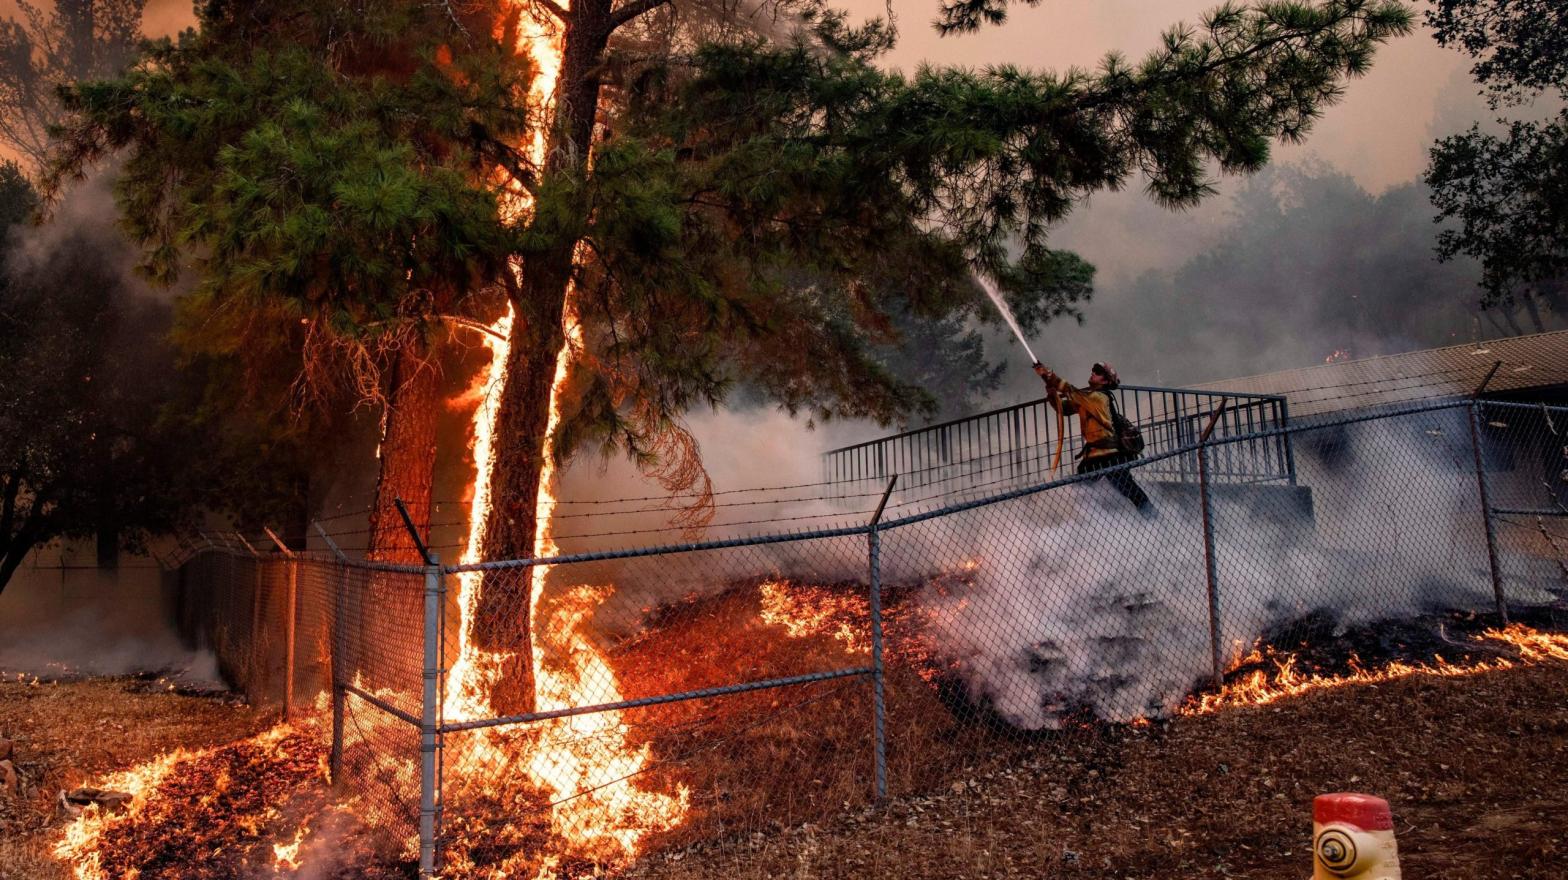 Cal Fire workers try to keep flames away from the St. Helena Water Treatment Plant in Napa Valley, California, during the Glass Fire in September 2020. (Photo: Samuel Corum / AFP, Getty Images)